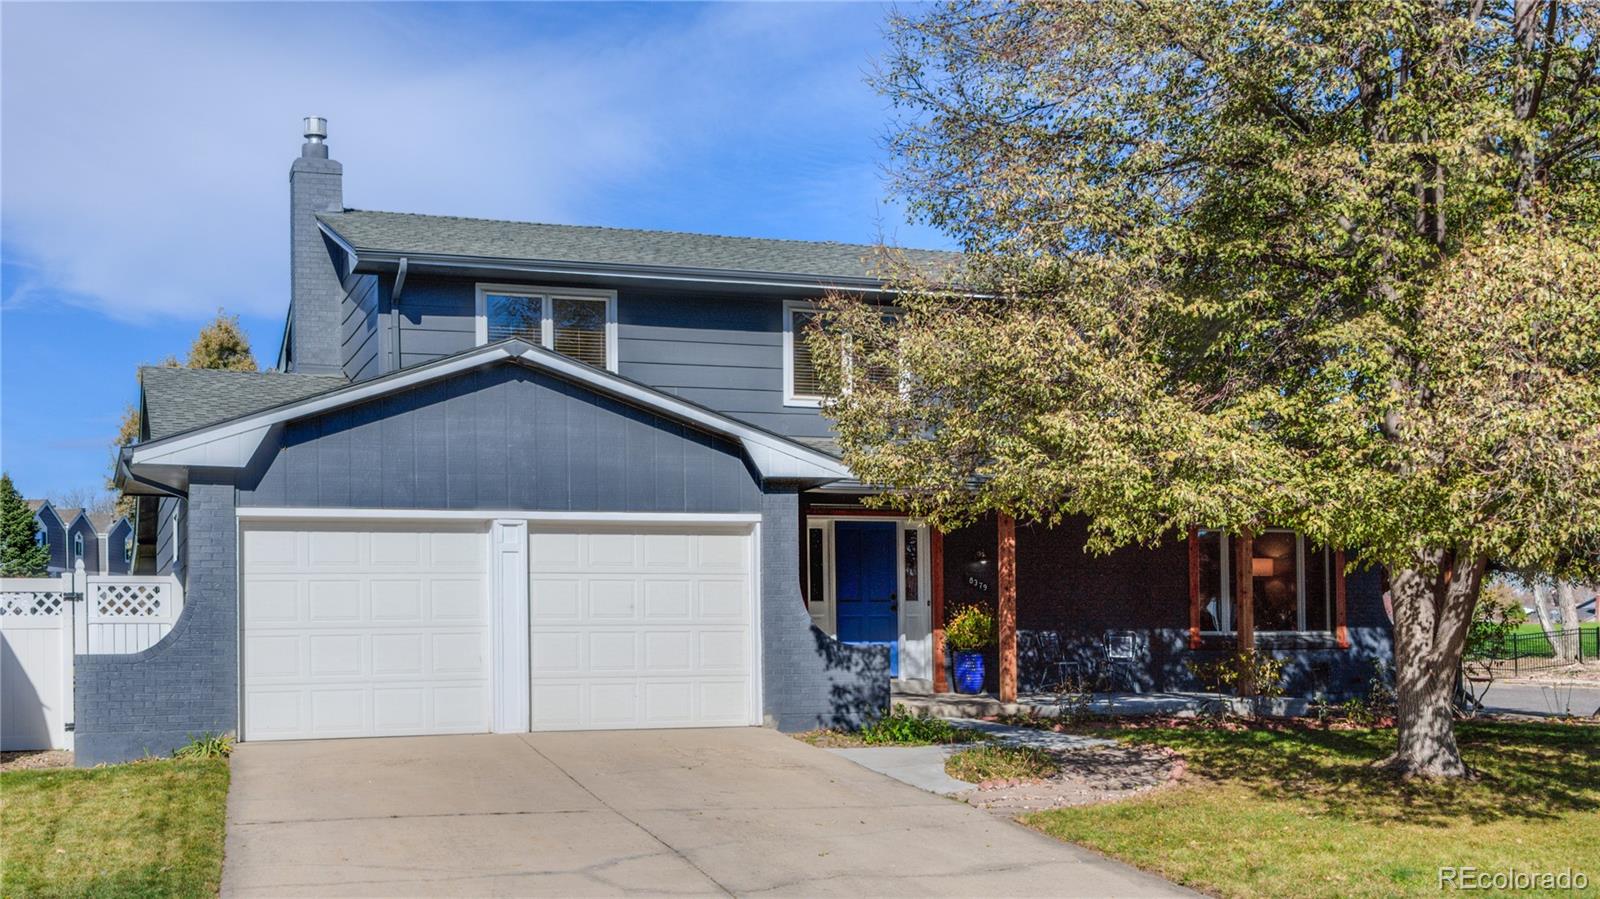 8379  quay drive, Arvada sold home. Closed on 2024-04-04 for $715,000.